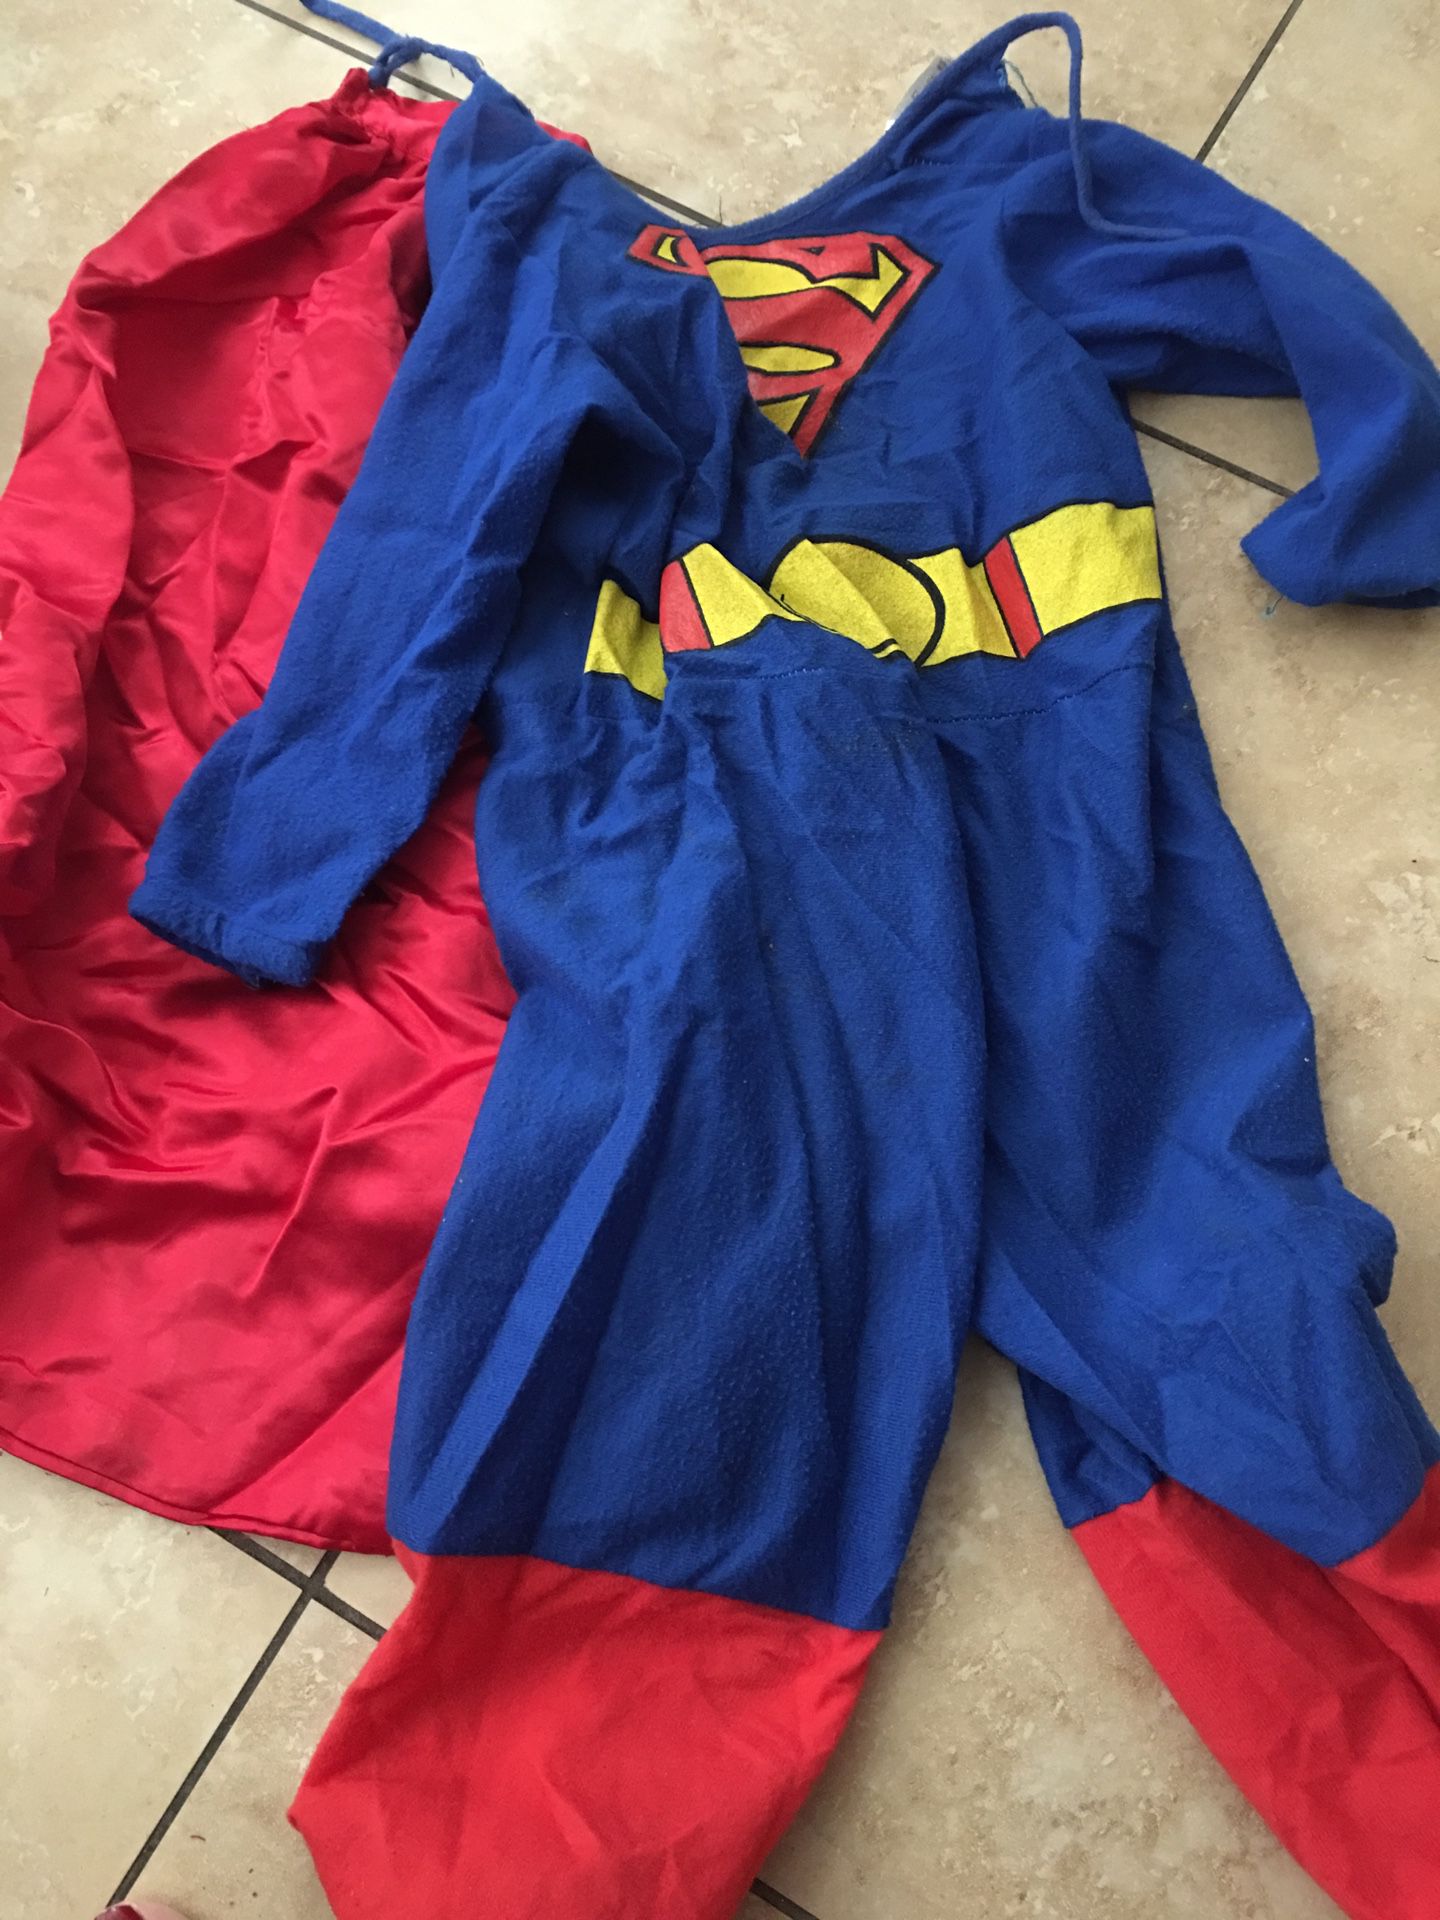 Superman Holloween costume size 2-4 yrs old